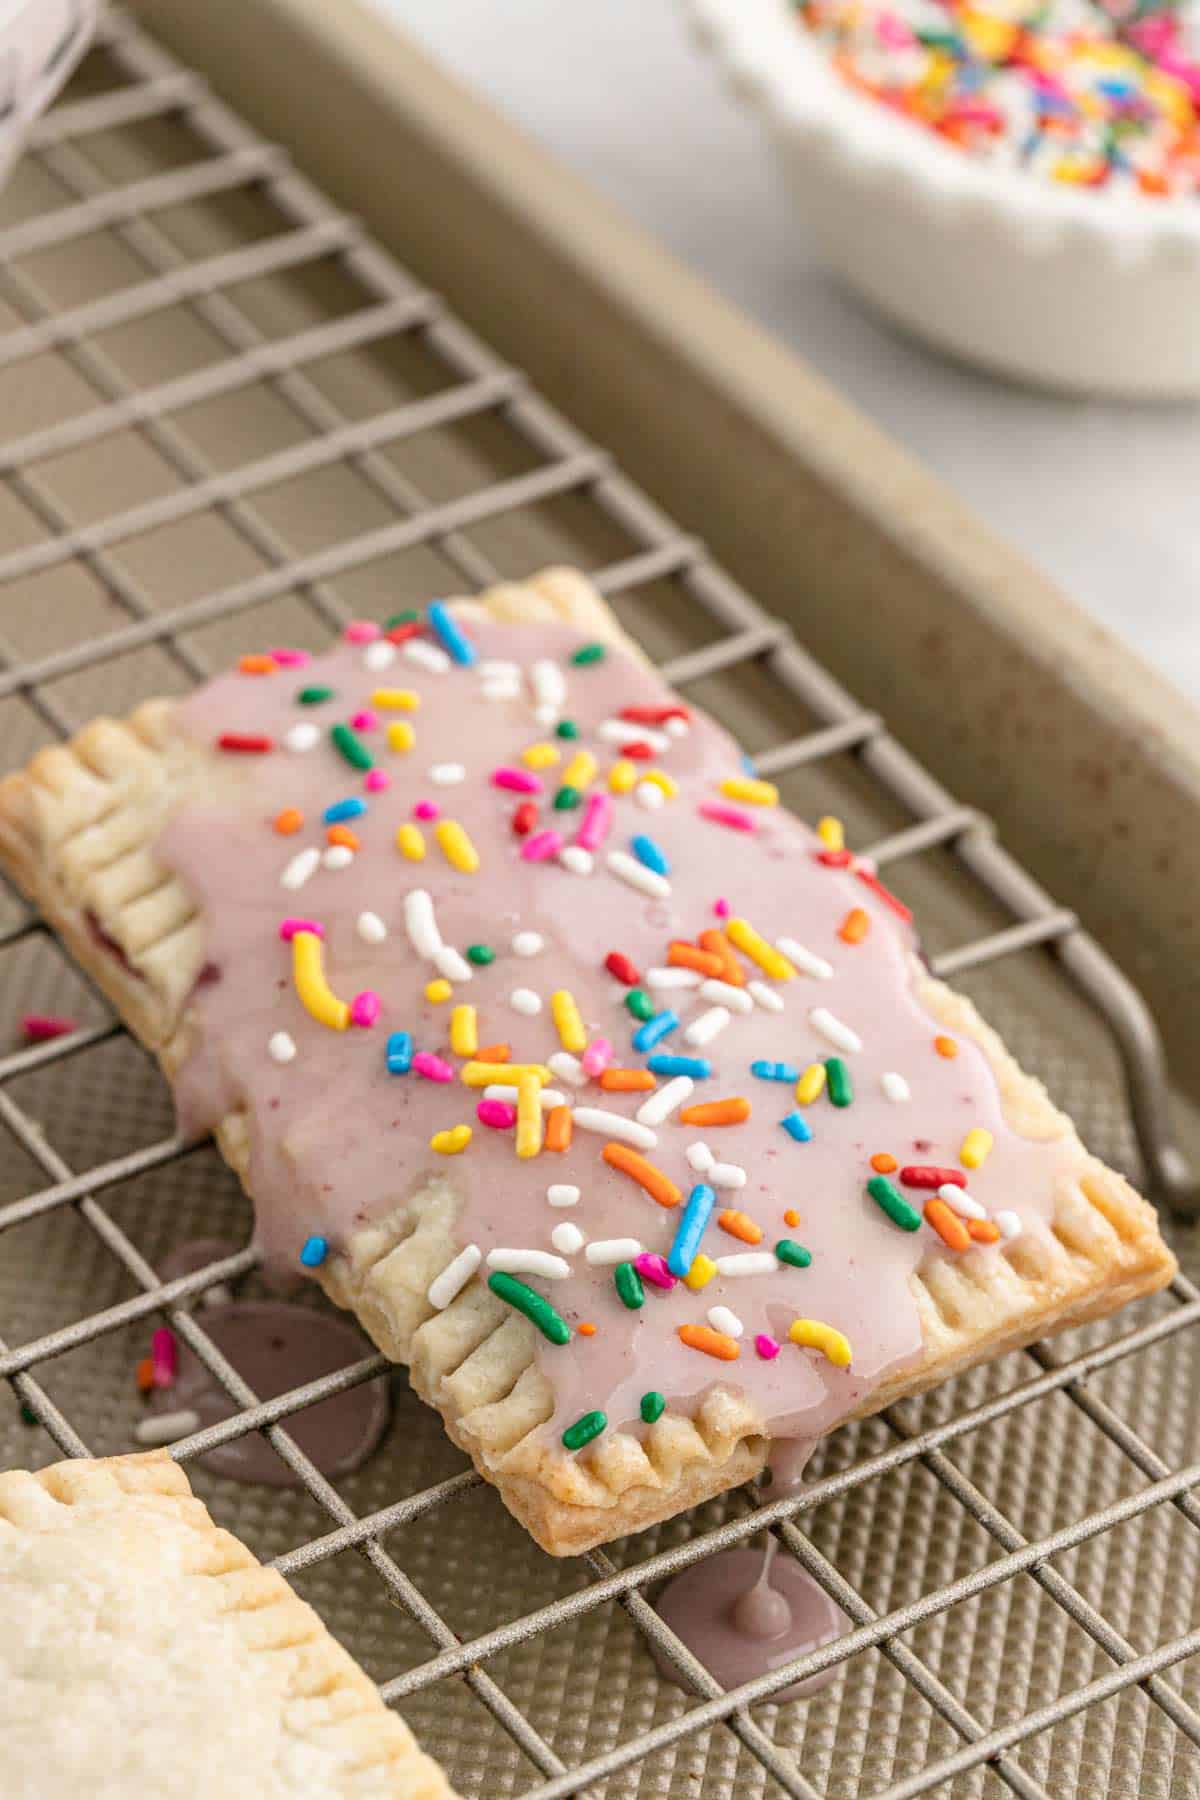 Finished pop tart on a wire rack.